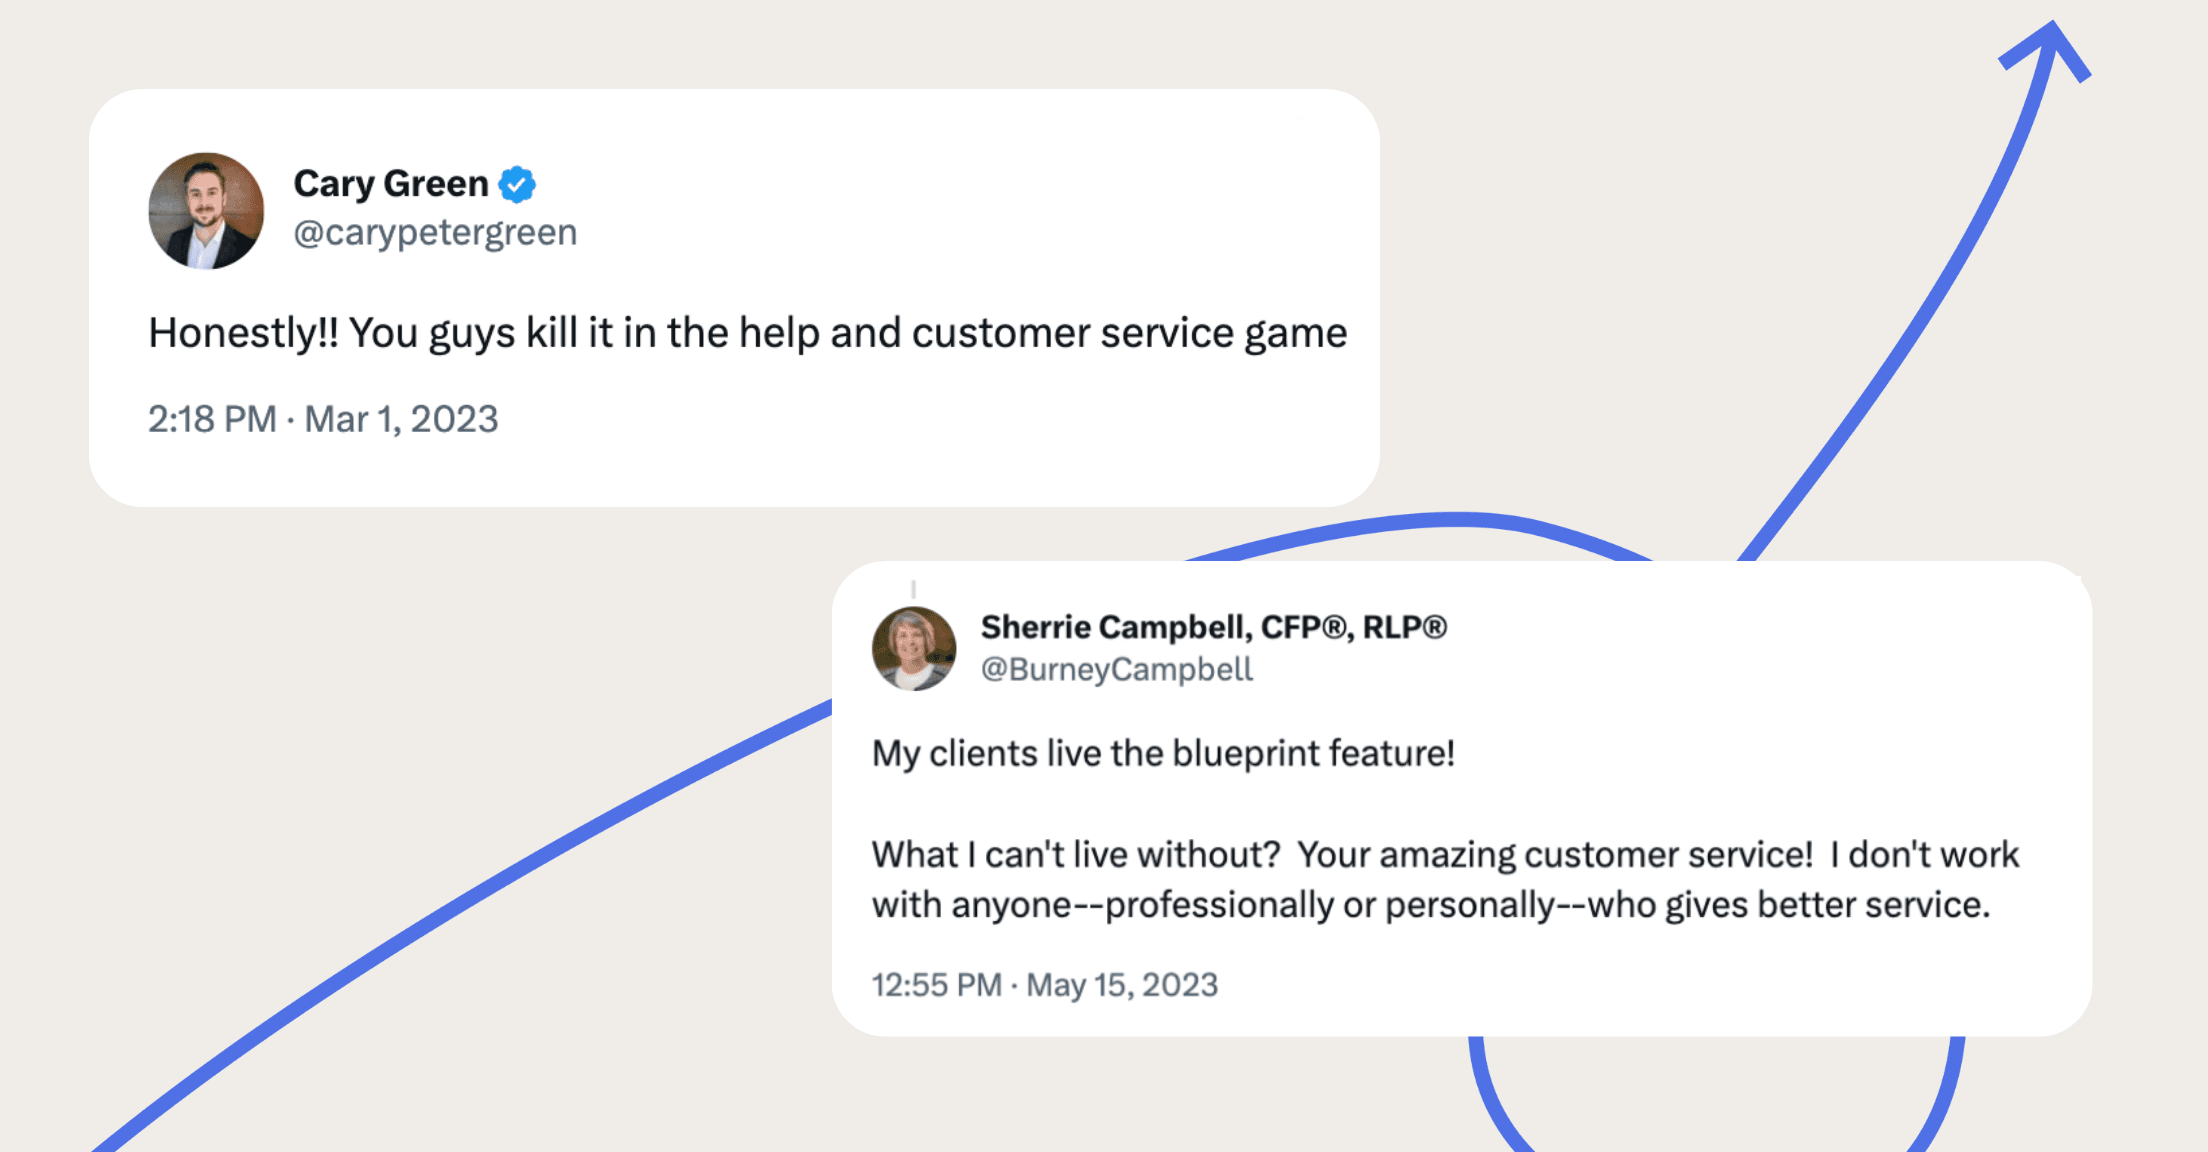 A tweet from an advisor saying to RightCapital "Honestly!! You guys kill it in the help and customer service game" and another saying to us "What can't I live without? Your amazing customer service! I don't work with anyone--professionally or personally--who gives better service."